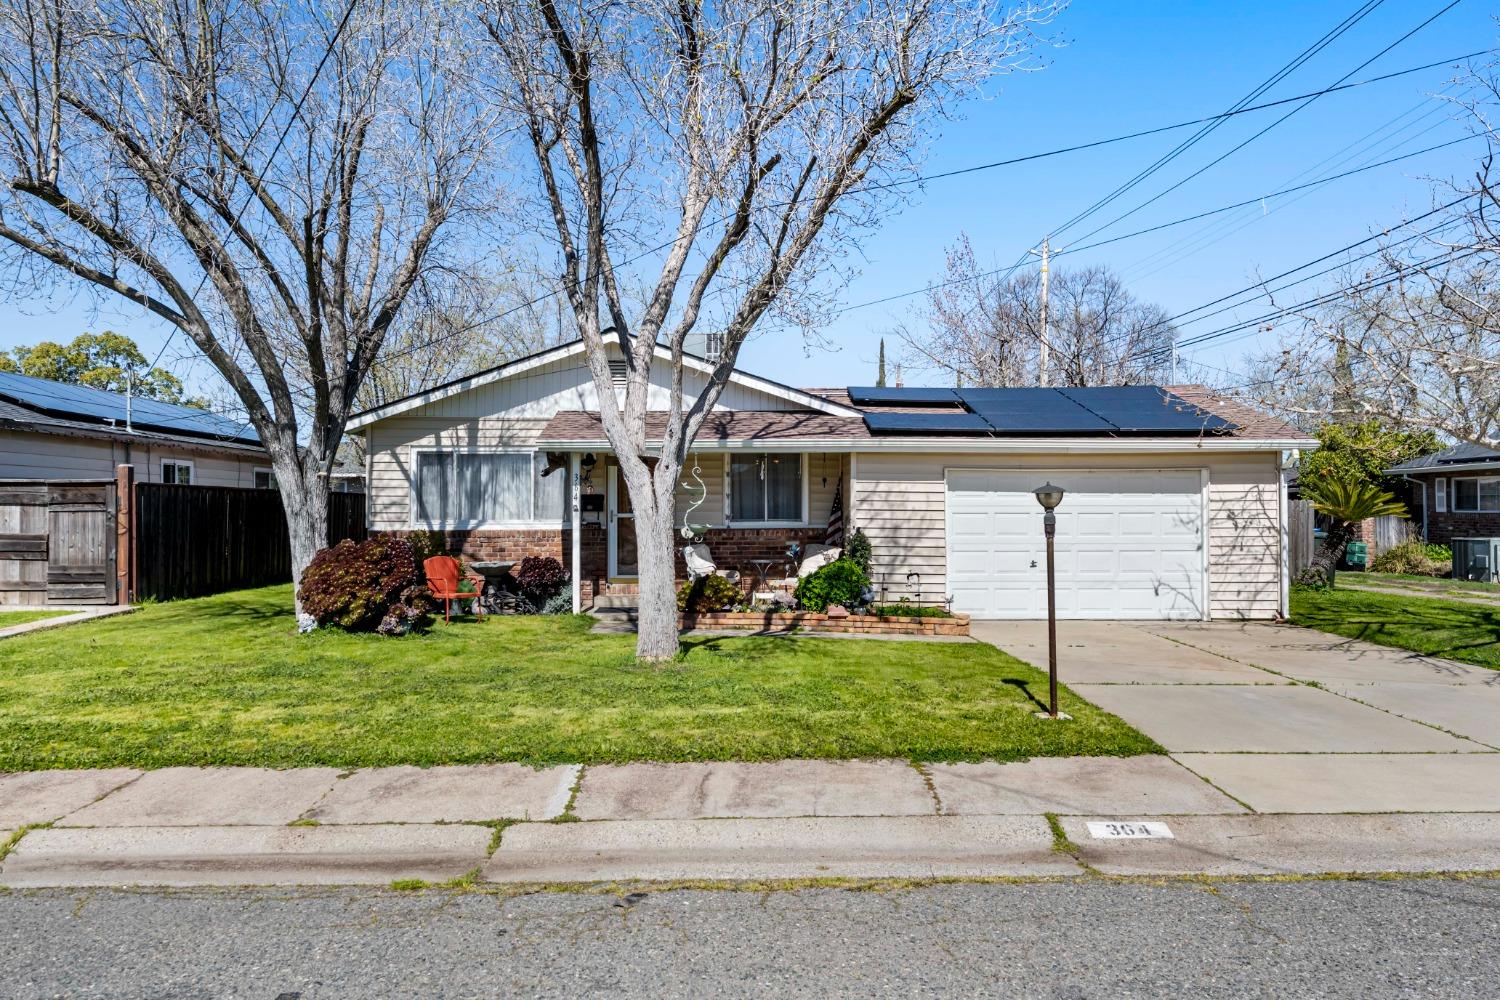 Photo of 364 8th St in Lincoln, CA